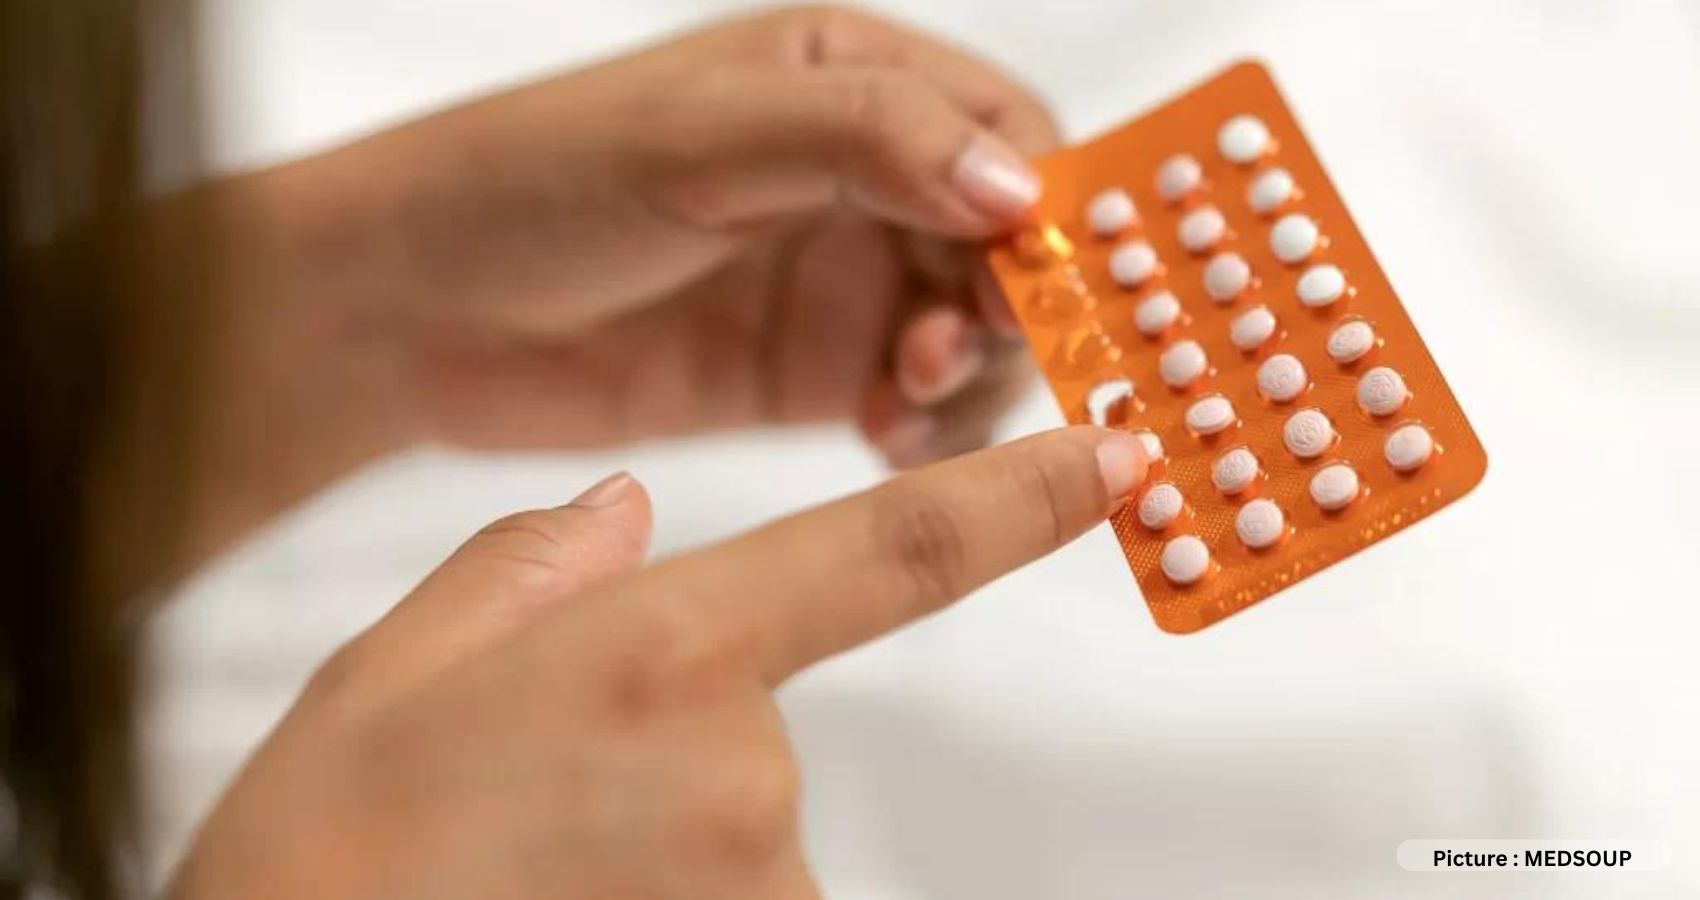 FDA Recommends Over-The-Counter Birth Control Pill In The US